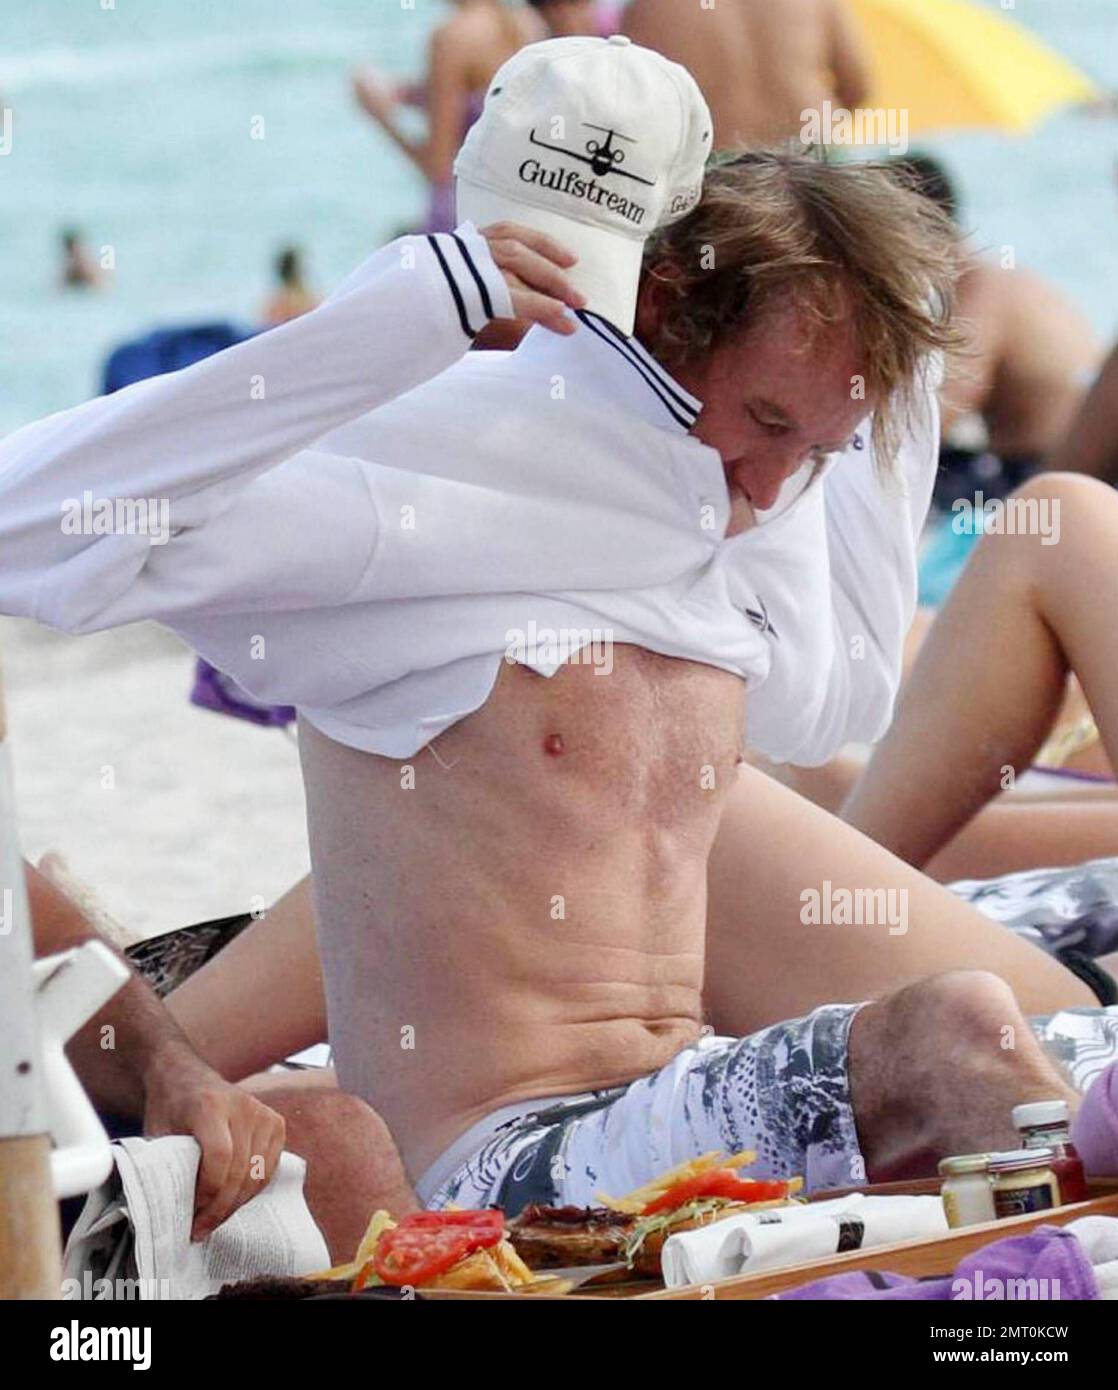 Blockbuster-making director Michael Bay hangs out at the beach with some friends over the Labor Day long weekend.  Bay, who is currently filming 'Transformers 3', showed off his trim physique as he put his shirt on before enjoying a newspaper followed by a burger and french fry lunch.  Bay has recently been in the news as he reportedly pledged a $50,000 reward to anyone who will identify a mystery woman who was video taped throwing live puppies in to a river, a video that can be seen on such websites as YouTube. Miami, FL. 09/04/10. Stock Photo